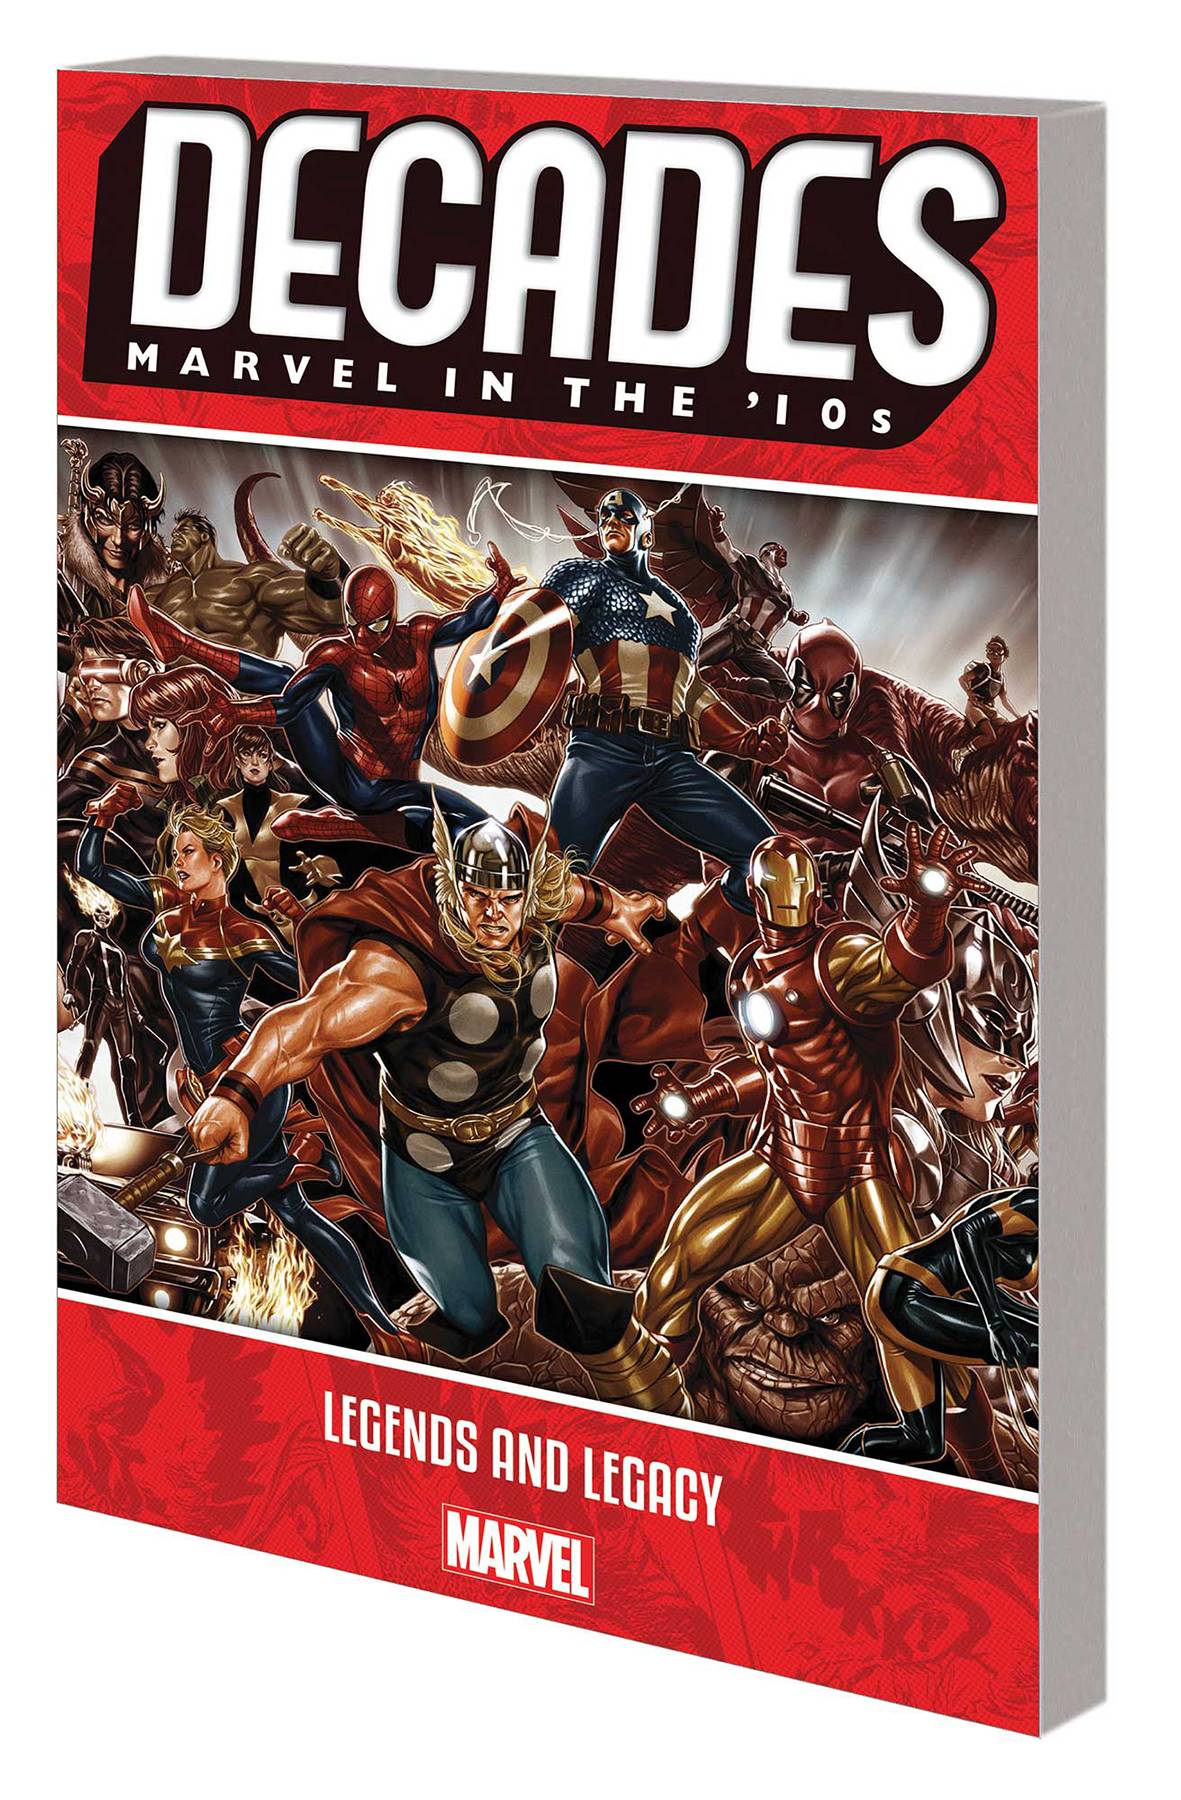 Decades Marvel 10s Graphic Novel Legends And Legacy